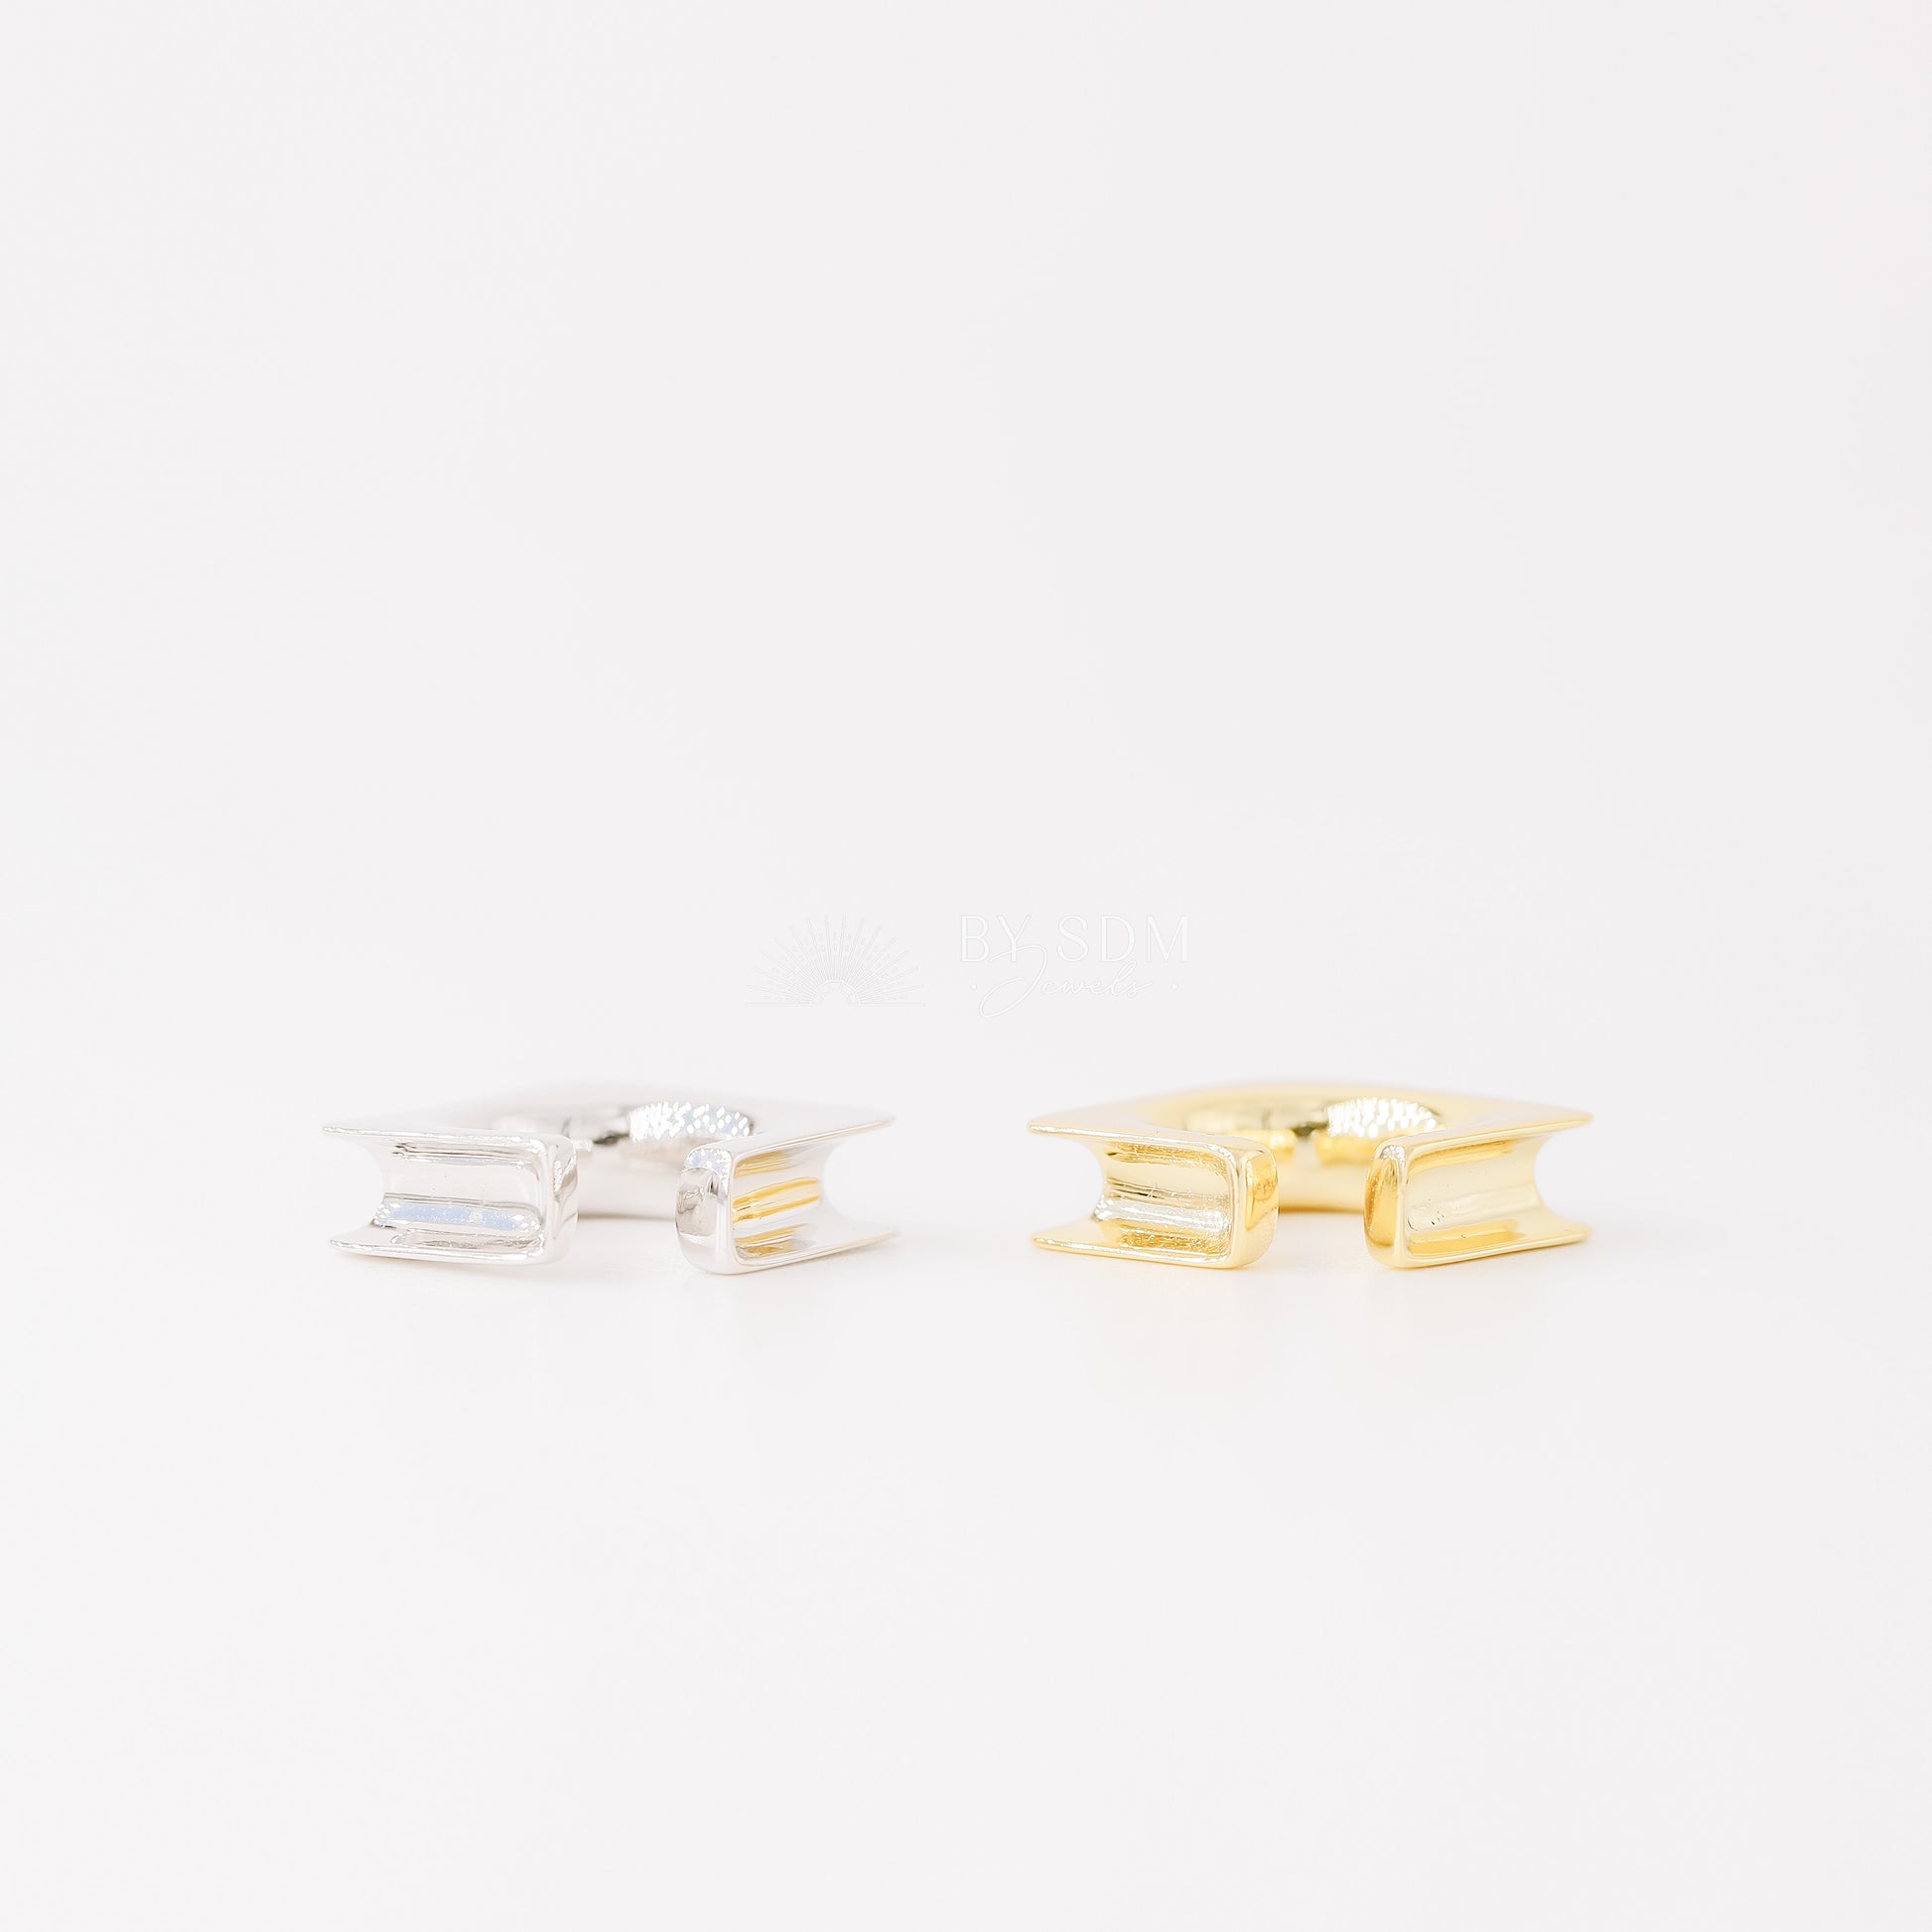 Square Large Band Ear Cuff • No Piercing is Needed • Gold, Silver